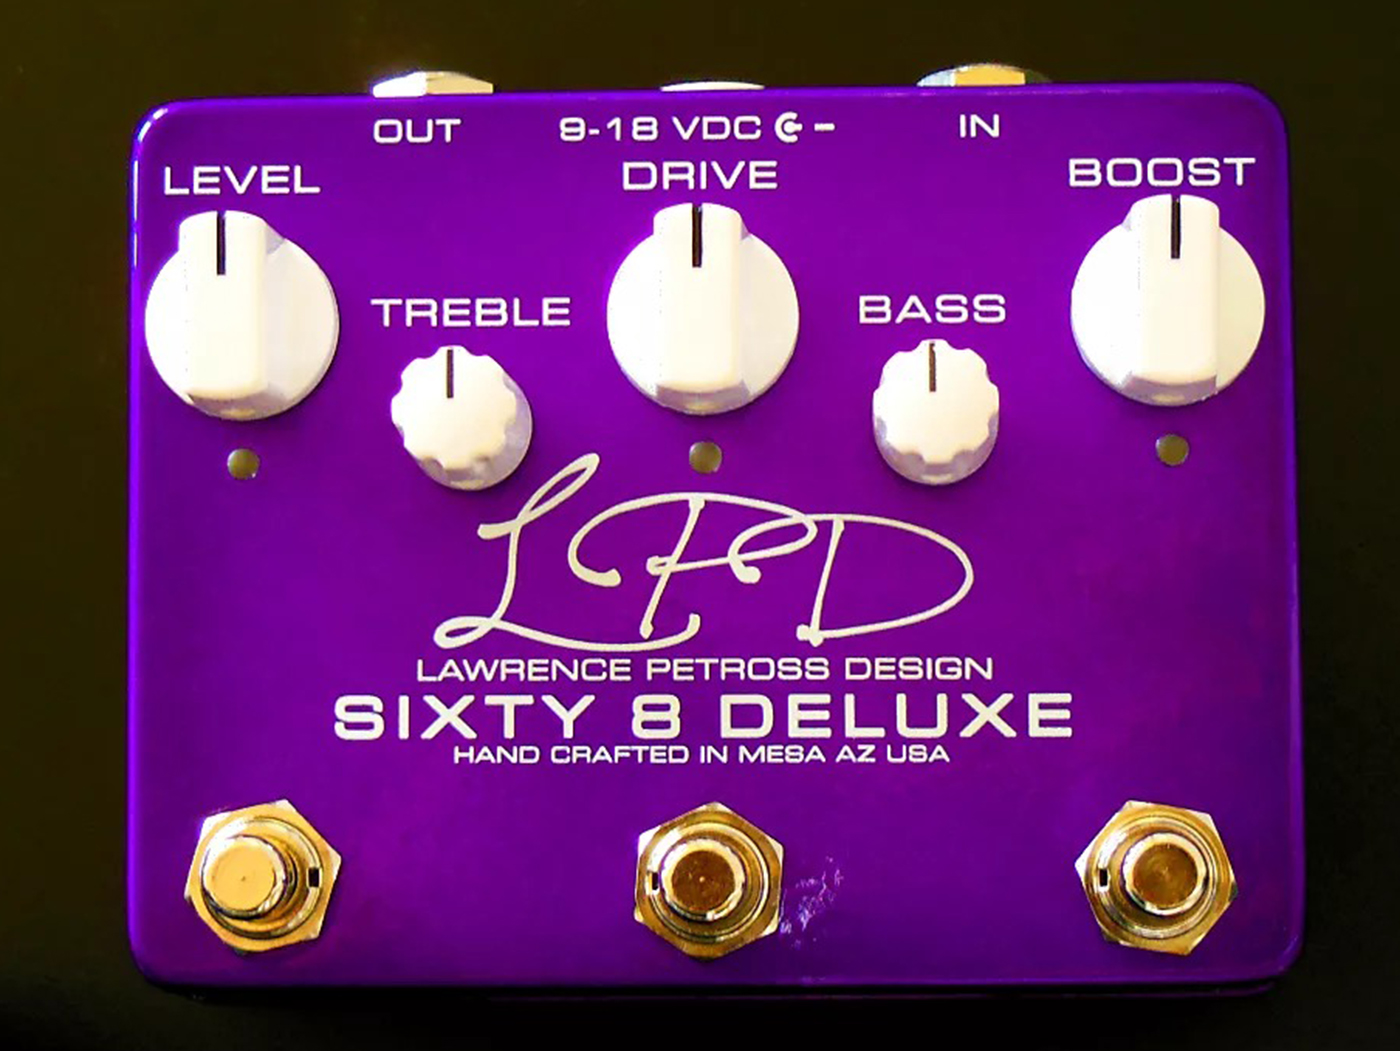 Lawrence Petross Design launches Sixty 8 Deluxe Overdrive